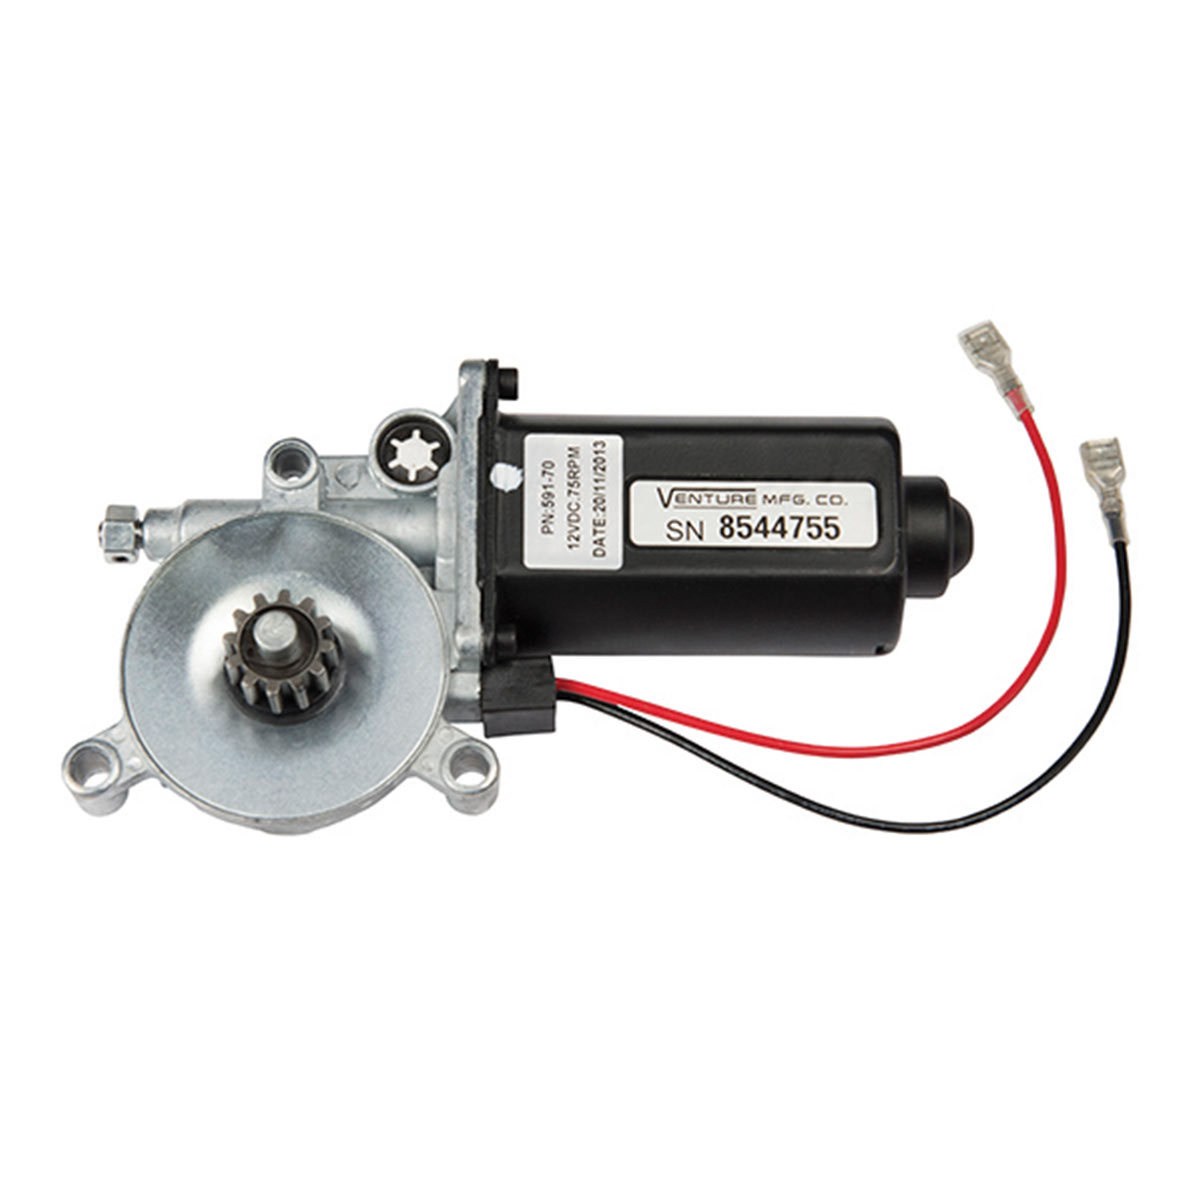 pitched and Short Assemblies LUFT MEISTER 266149 RV Power Awning Replacement Universal Motor with Dual Connectors 12-Volt DC 75-RPM Compatible with Solera Power Awnings Including Flat 